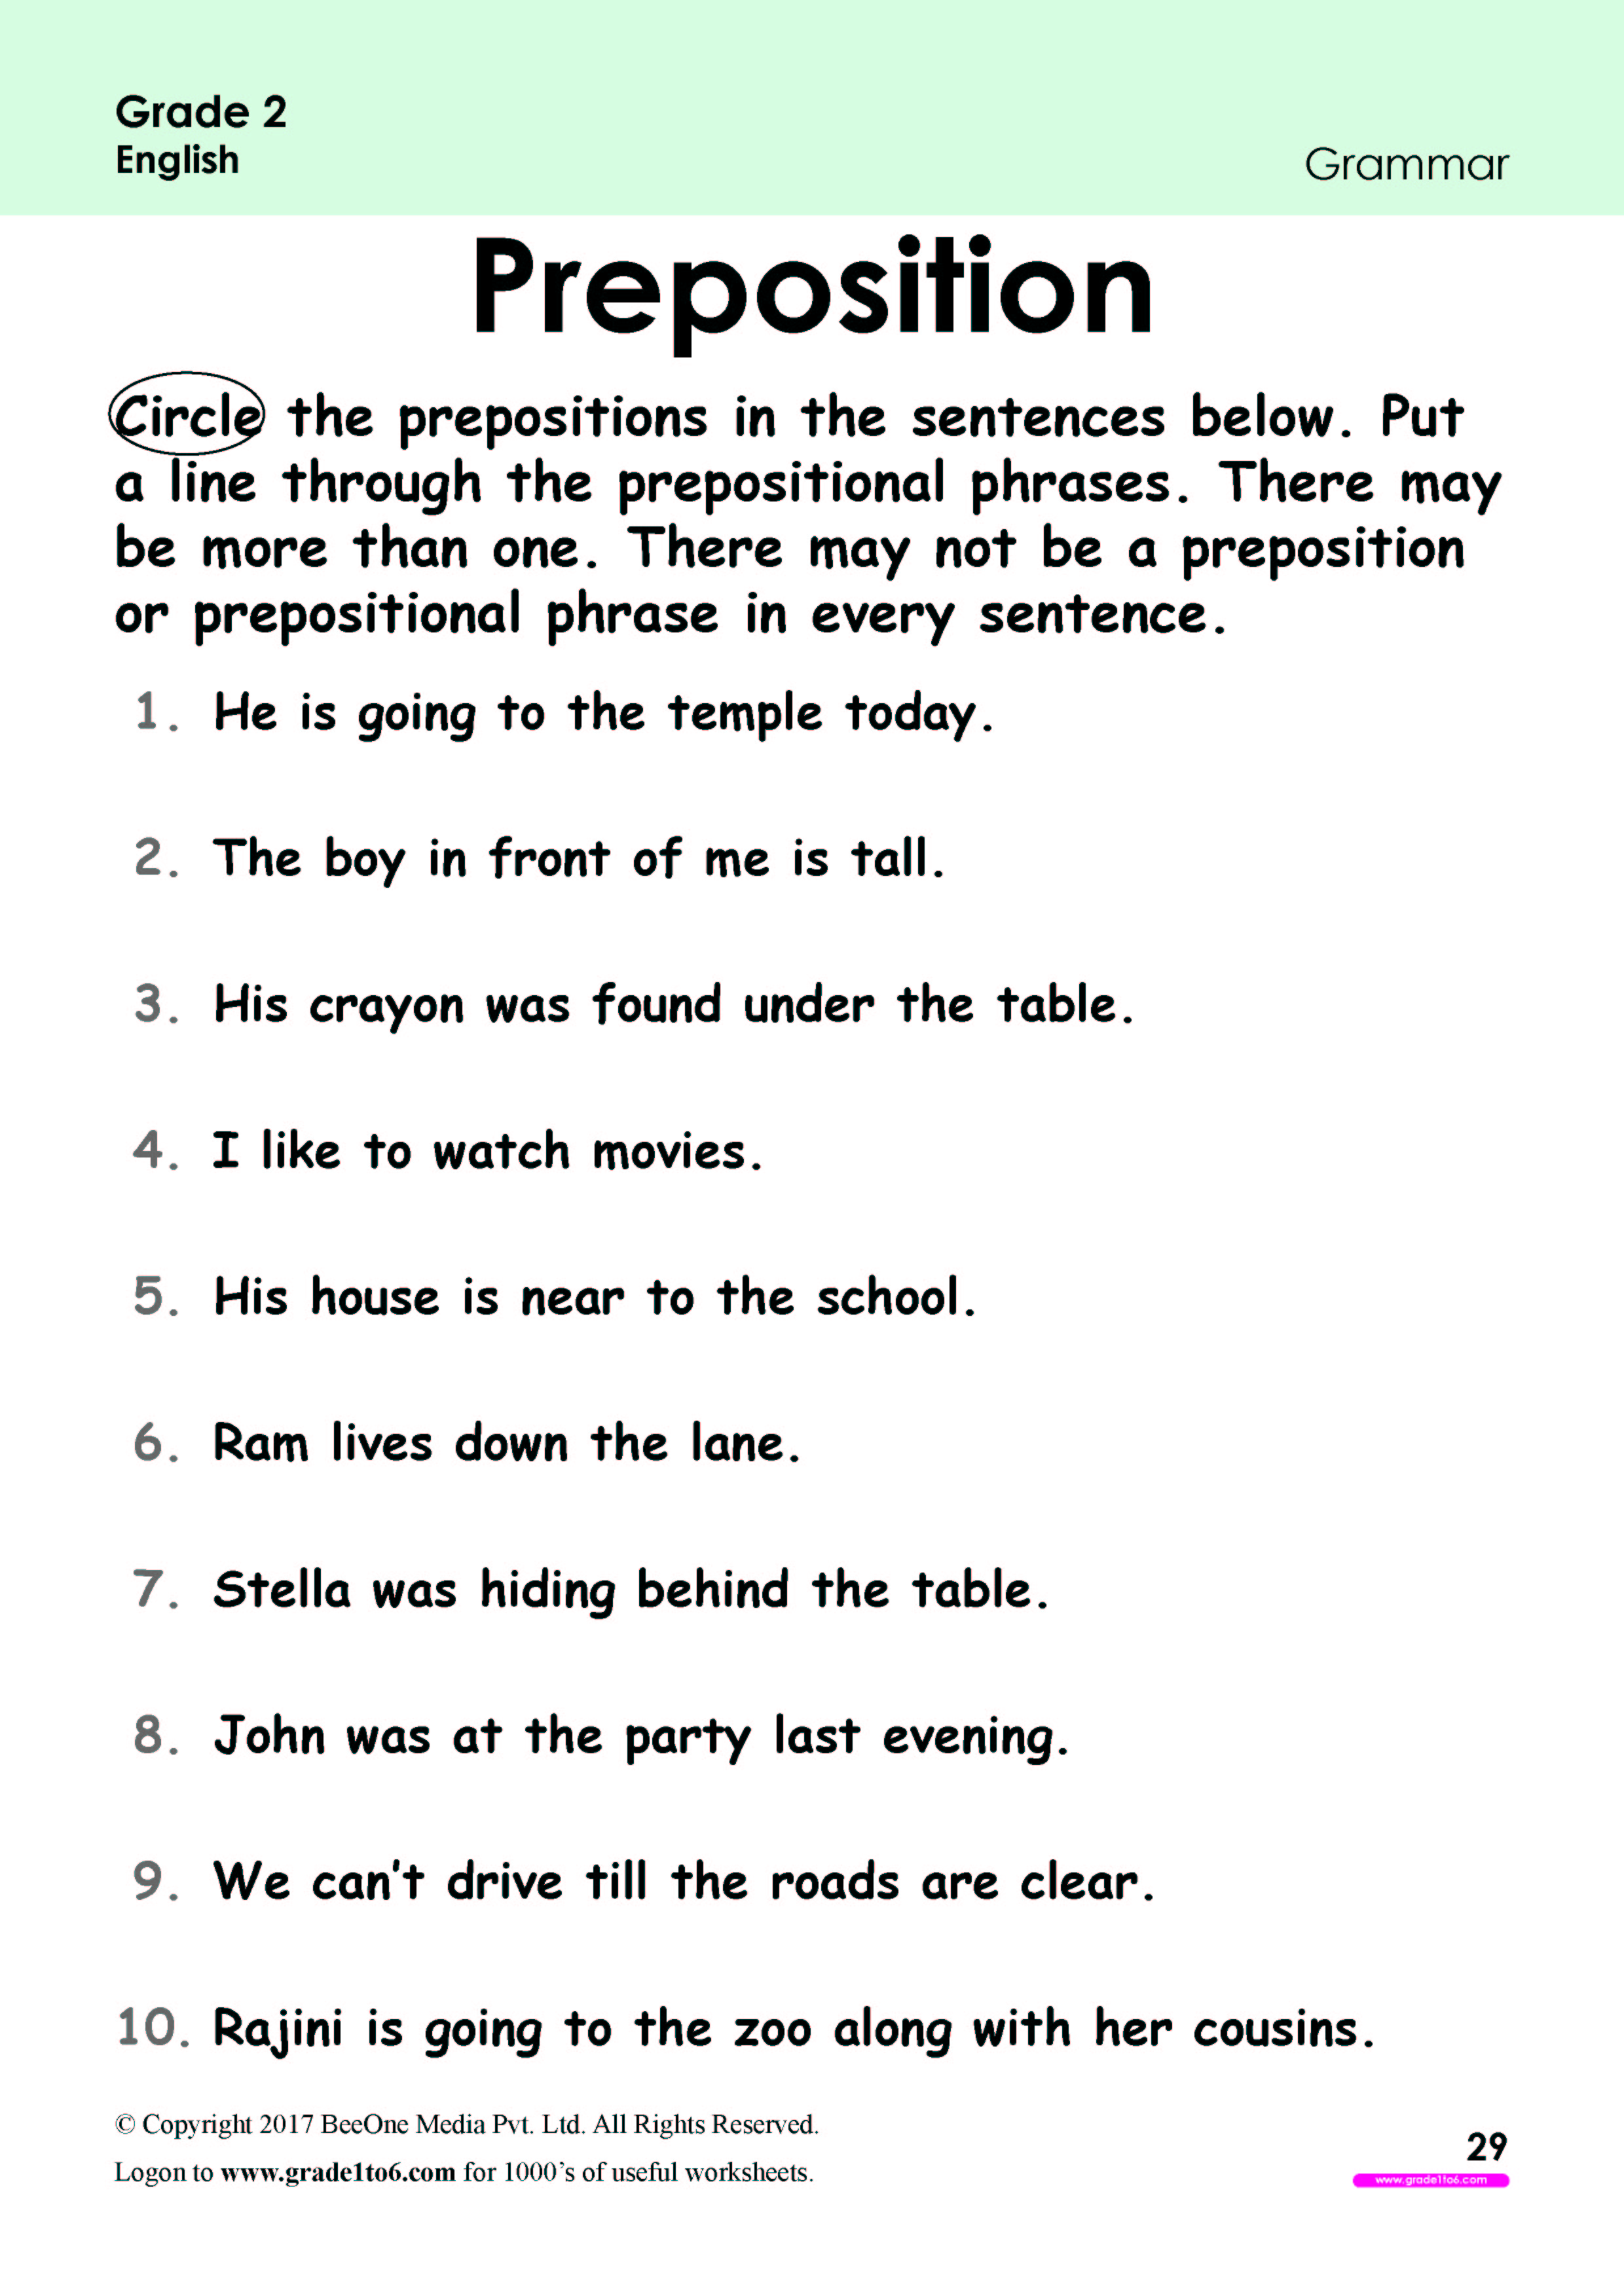 preposition-worksheets-www-grade1to6